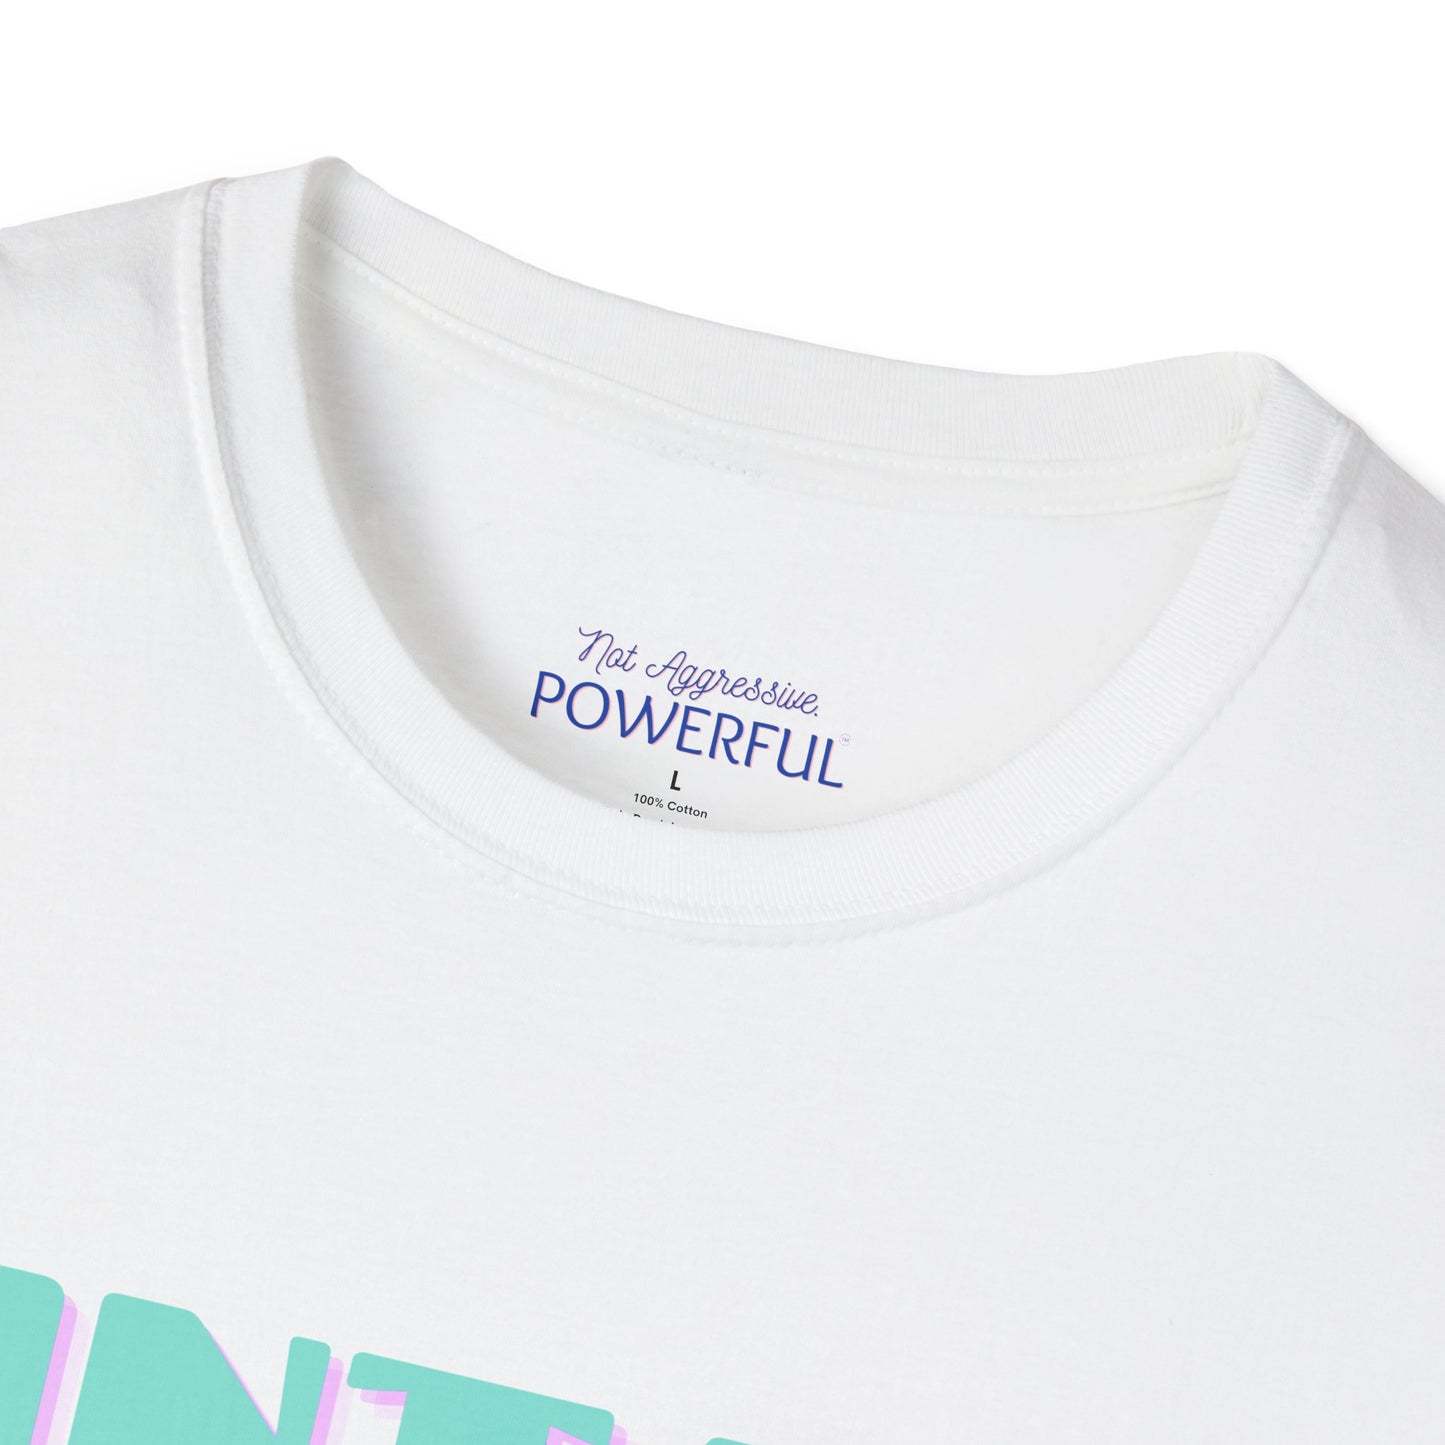 Vintage Not Aggressive. POWERFUL™️ Not Aggressive. POWERFUL™️ Unisex Softstyle T-Shirt Eurofit